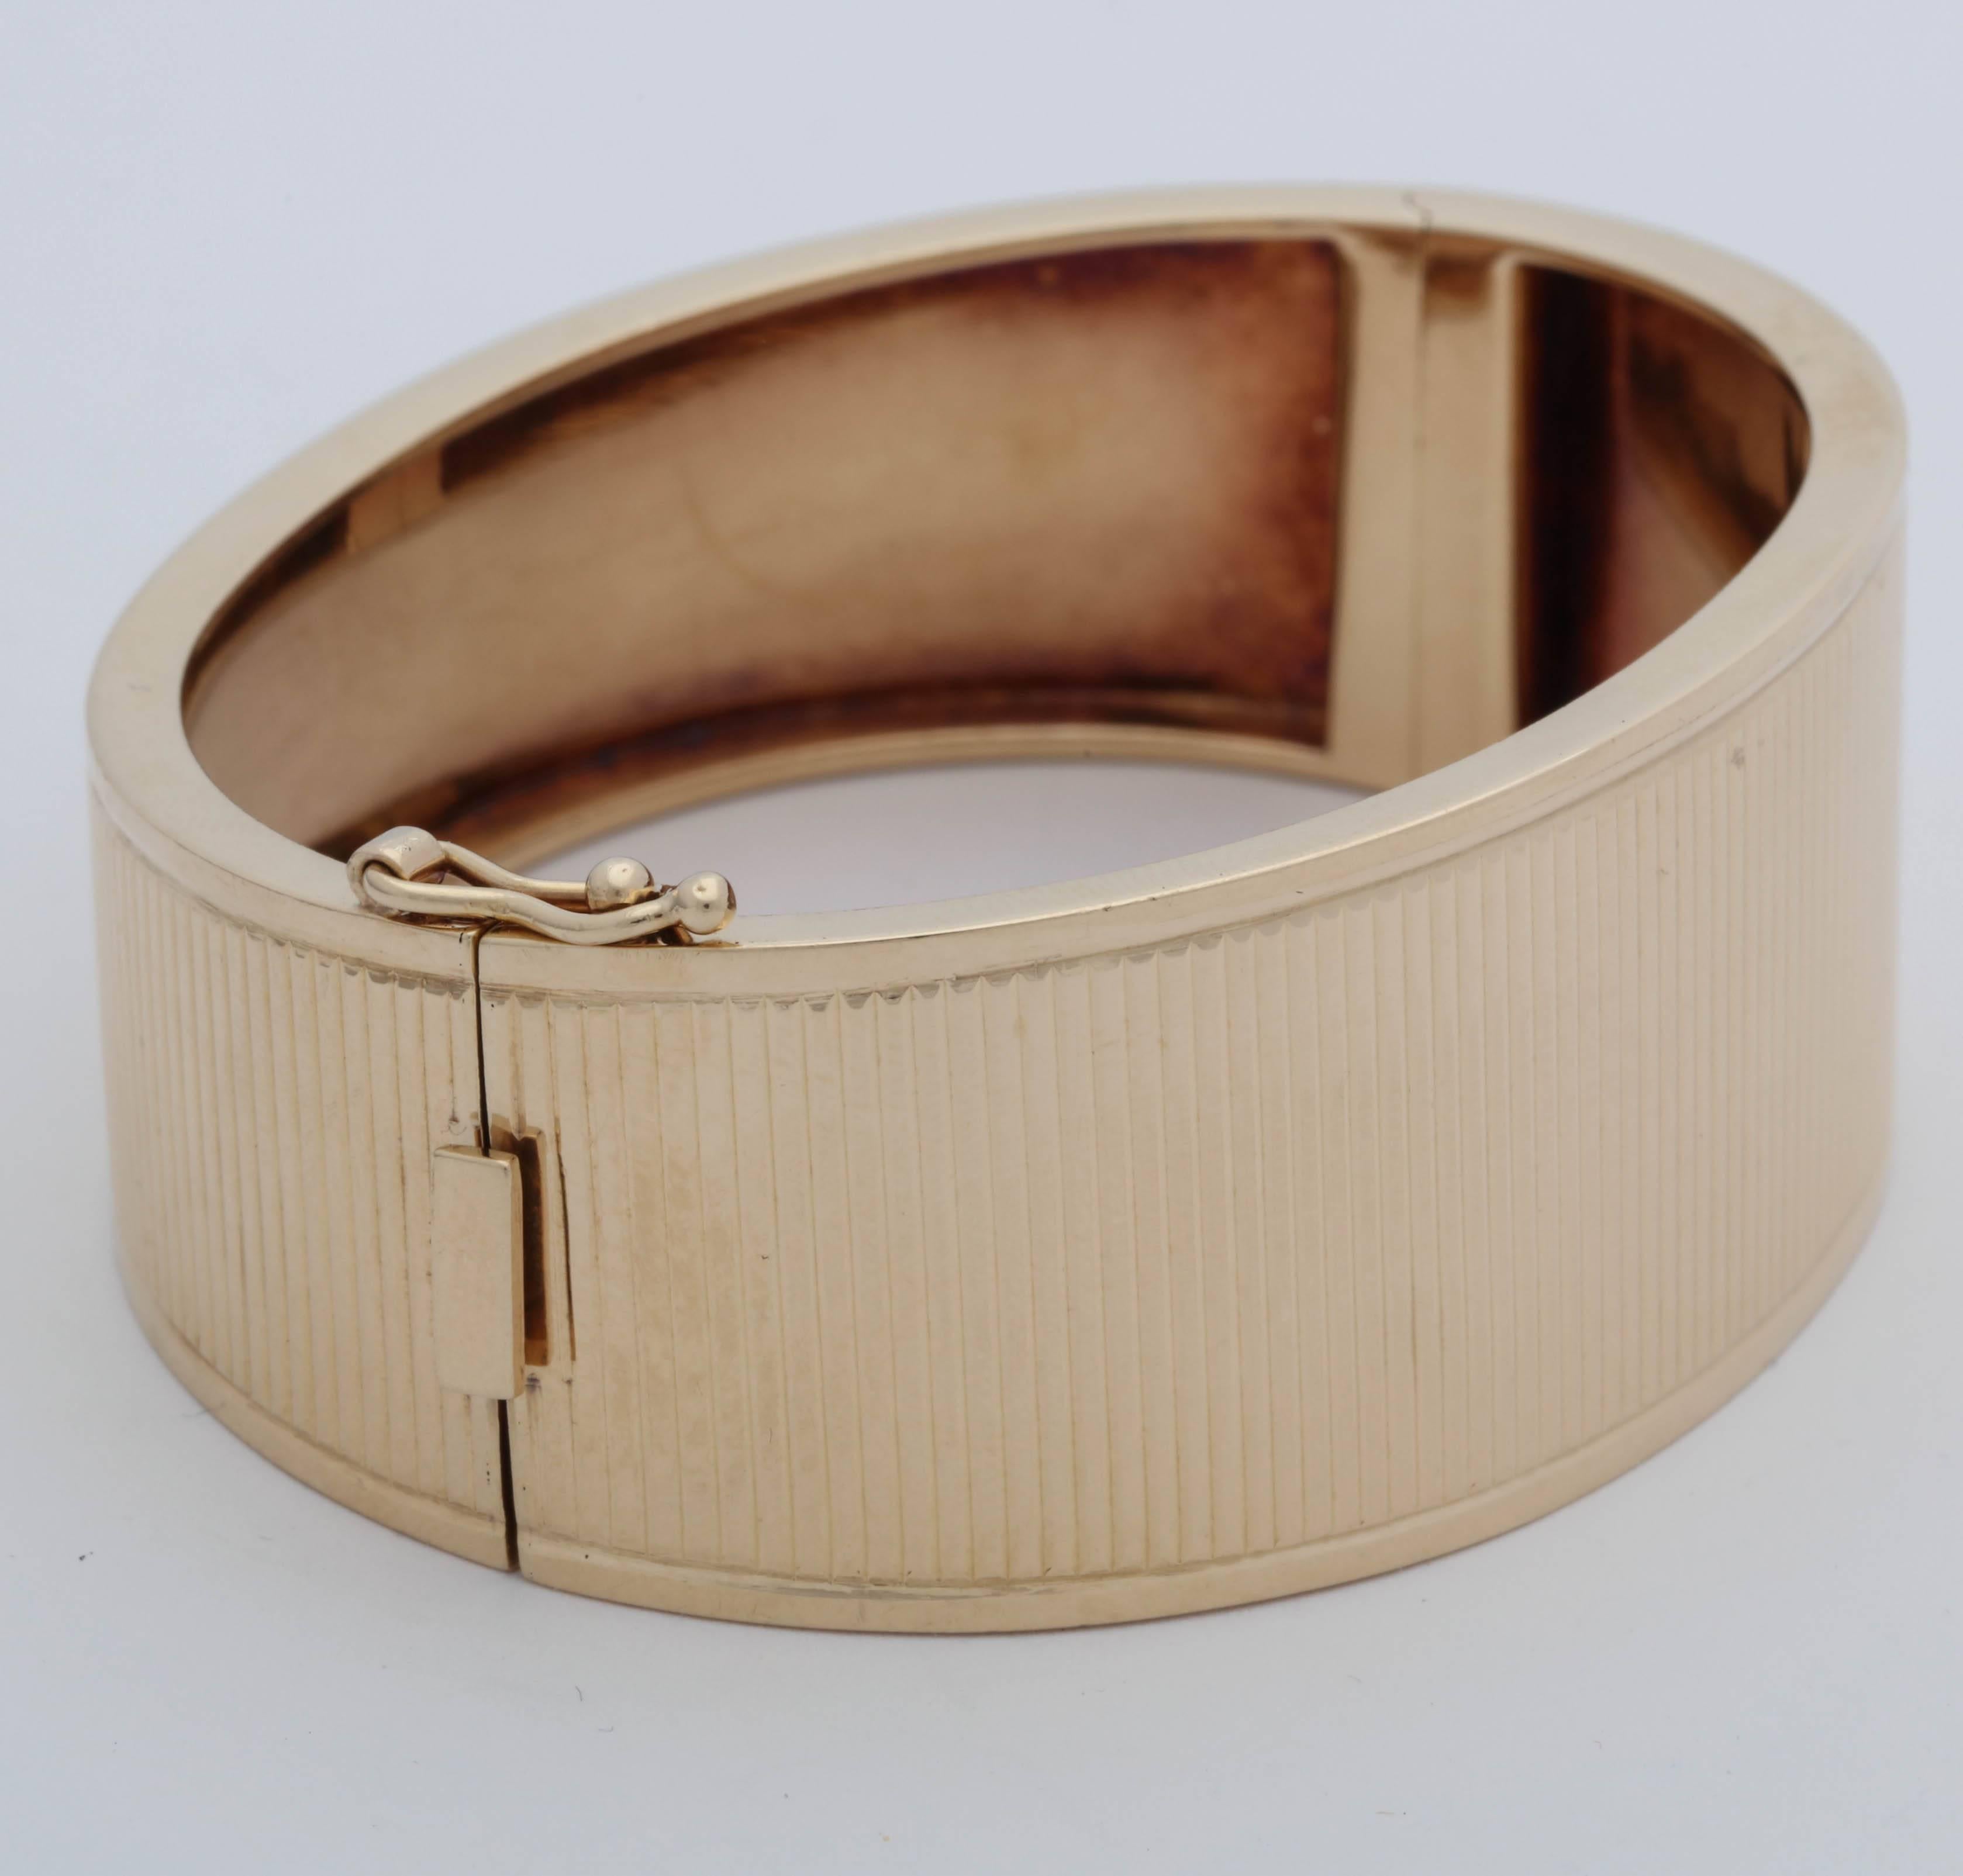 Women's 1940s Cool, Chic and Hip High Polish Ridged Gold Tapered Bangle Bracelet